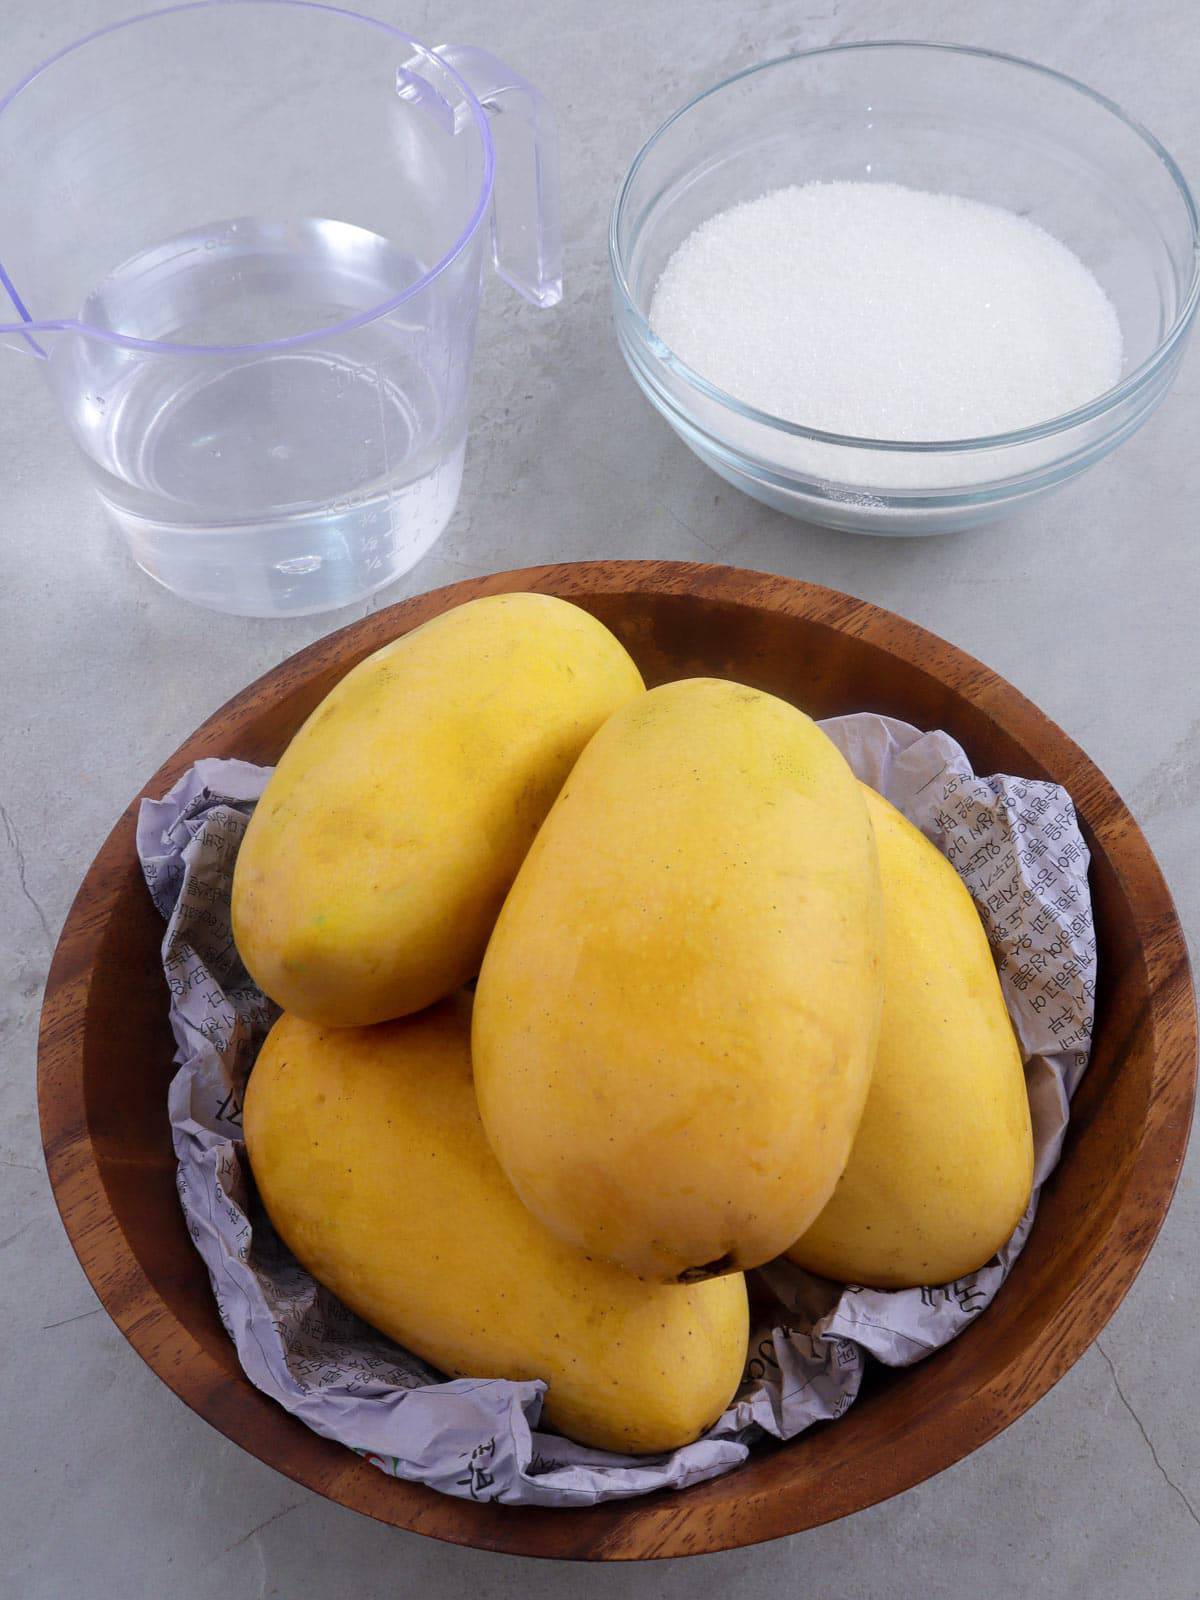 Manila mangoes in a brown bowl with a a glass of water and a bowl of sugar on the side